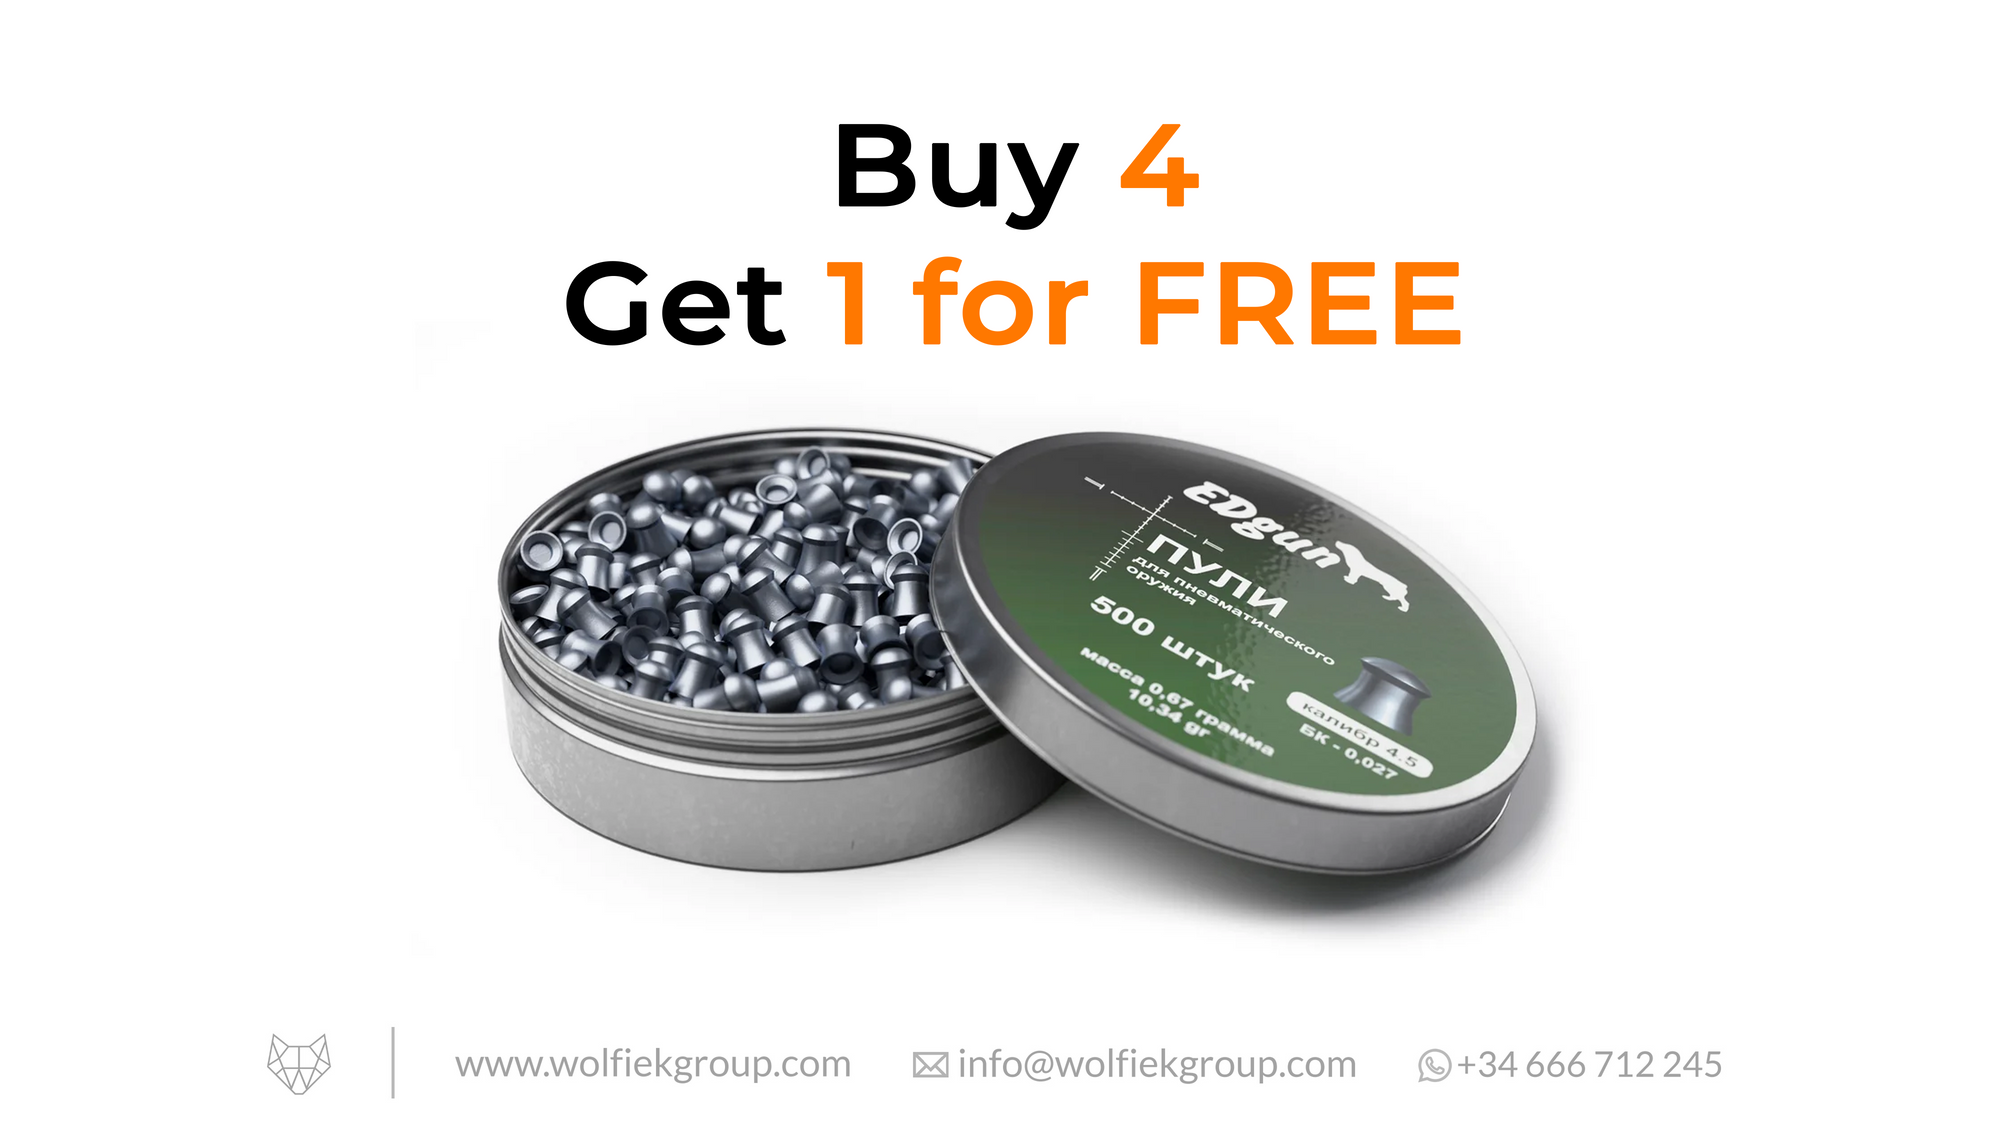 EDgun Premium Pellets Cal .177 (4,52mm) Weight 0,67g (10,34gr) with text buy 4 get 1 for free